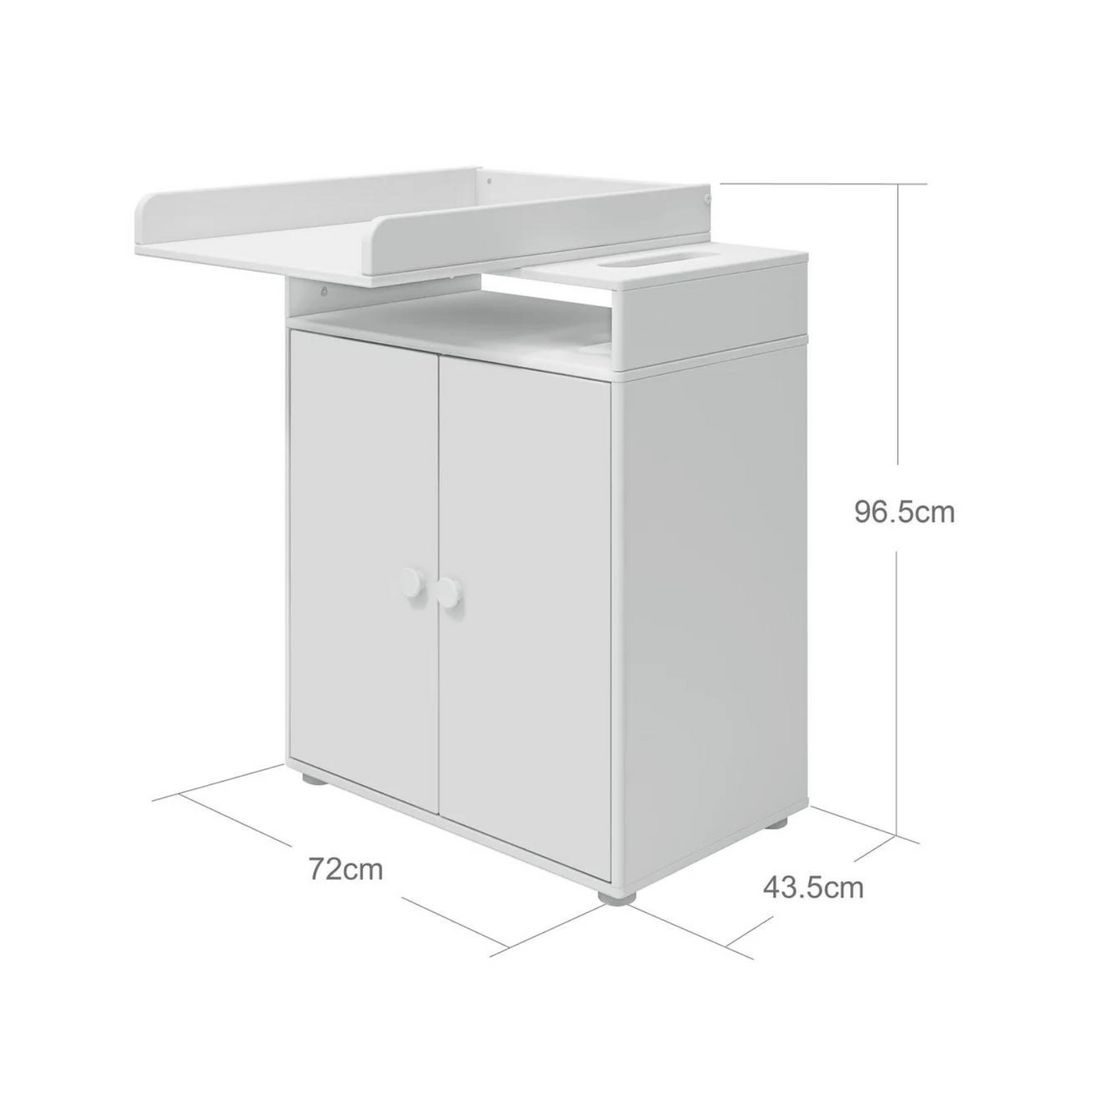 Flexa Changing Table dimensions